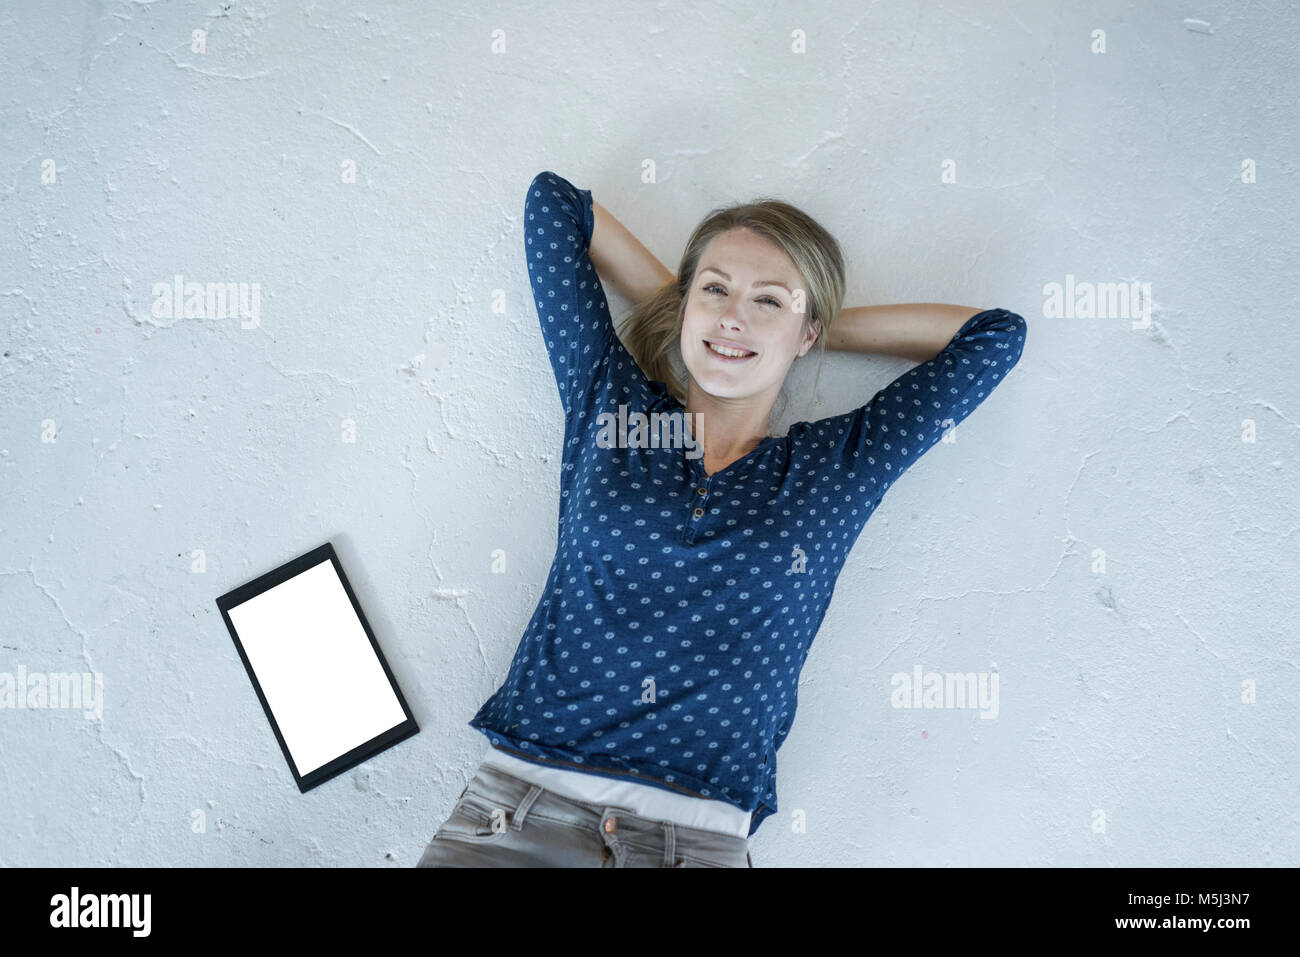 Portrait of smiling young woman lying on the floor with tablet Stock Photo